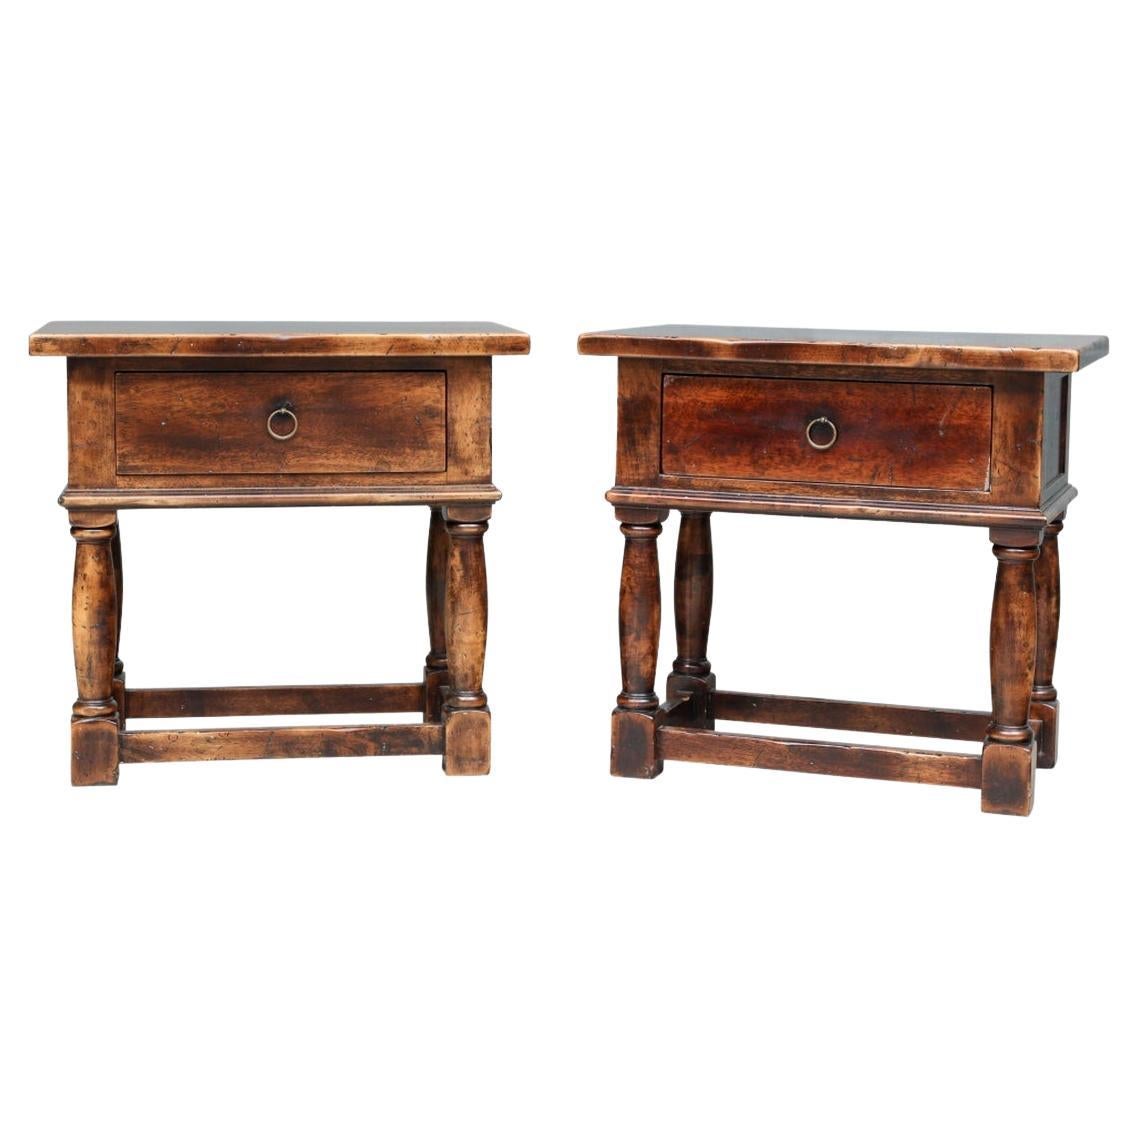 Pair Italian Artisan Crafted End Tables By Guido Zichele For Bloomingdales For Sale